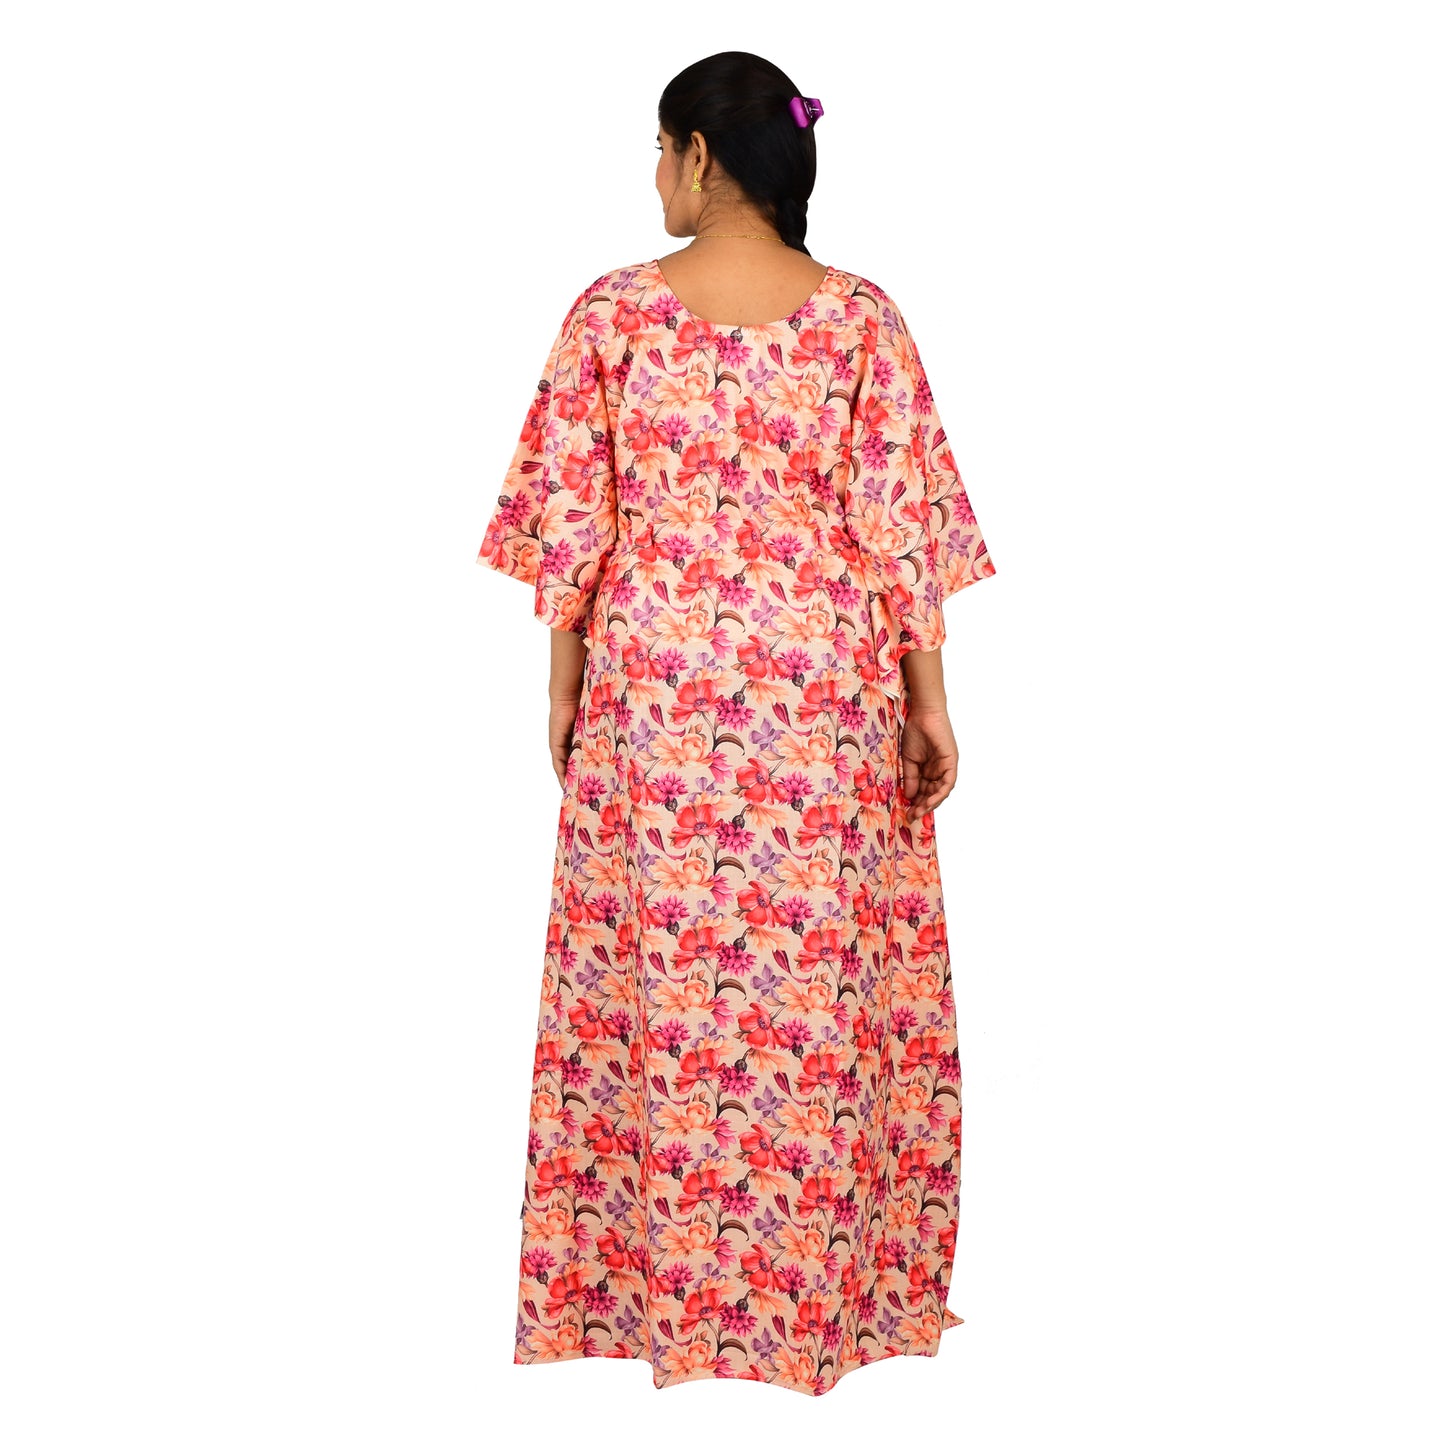 Digital Printed Cotton Blend Nighty For Women - Pink